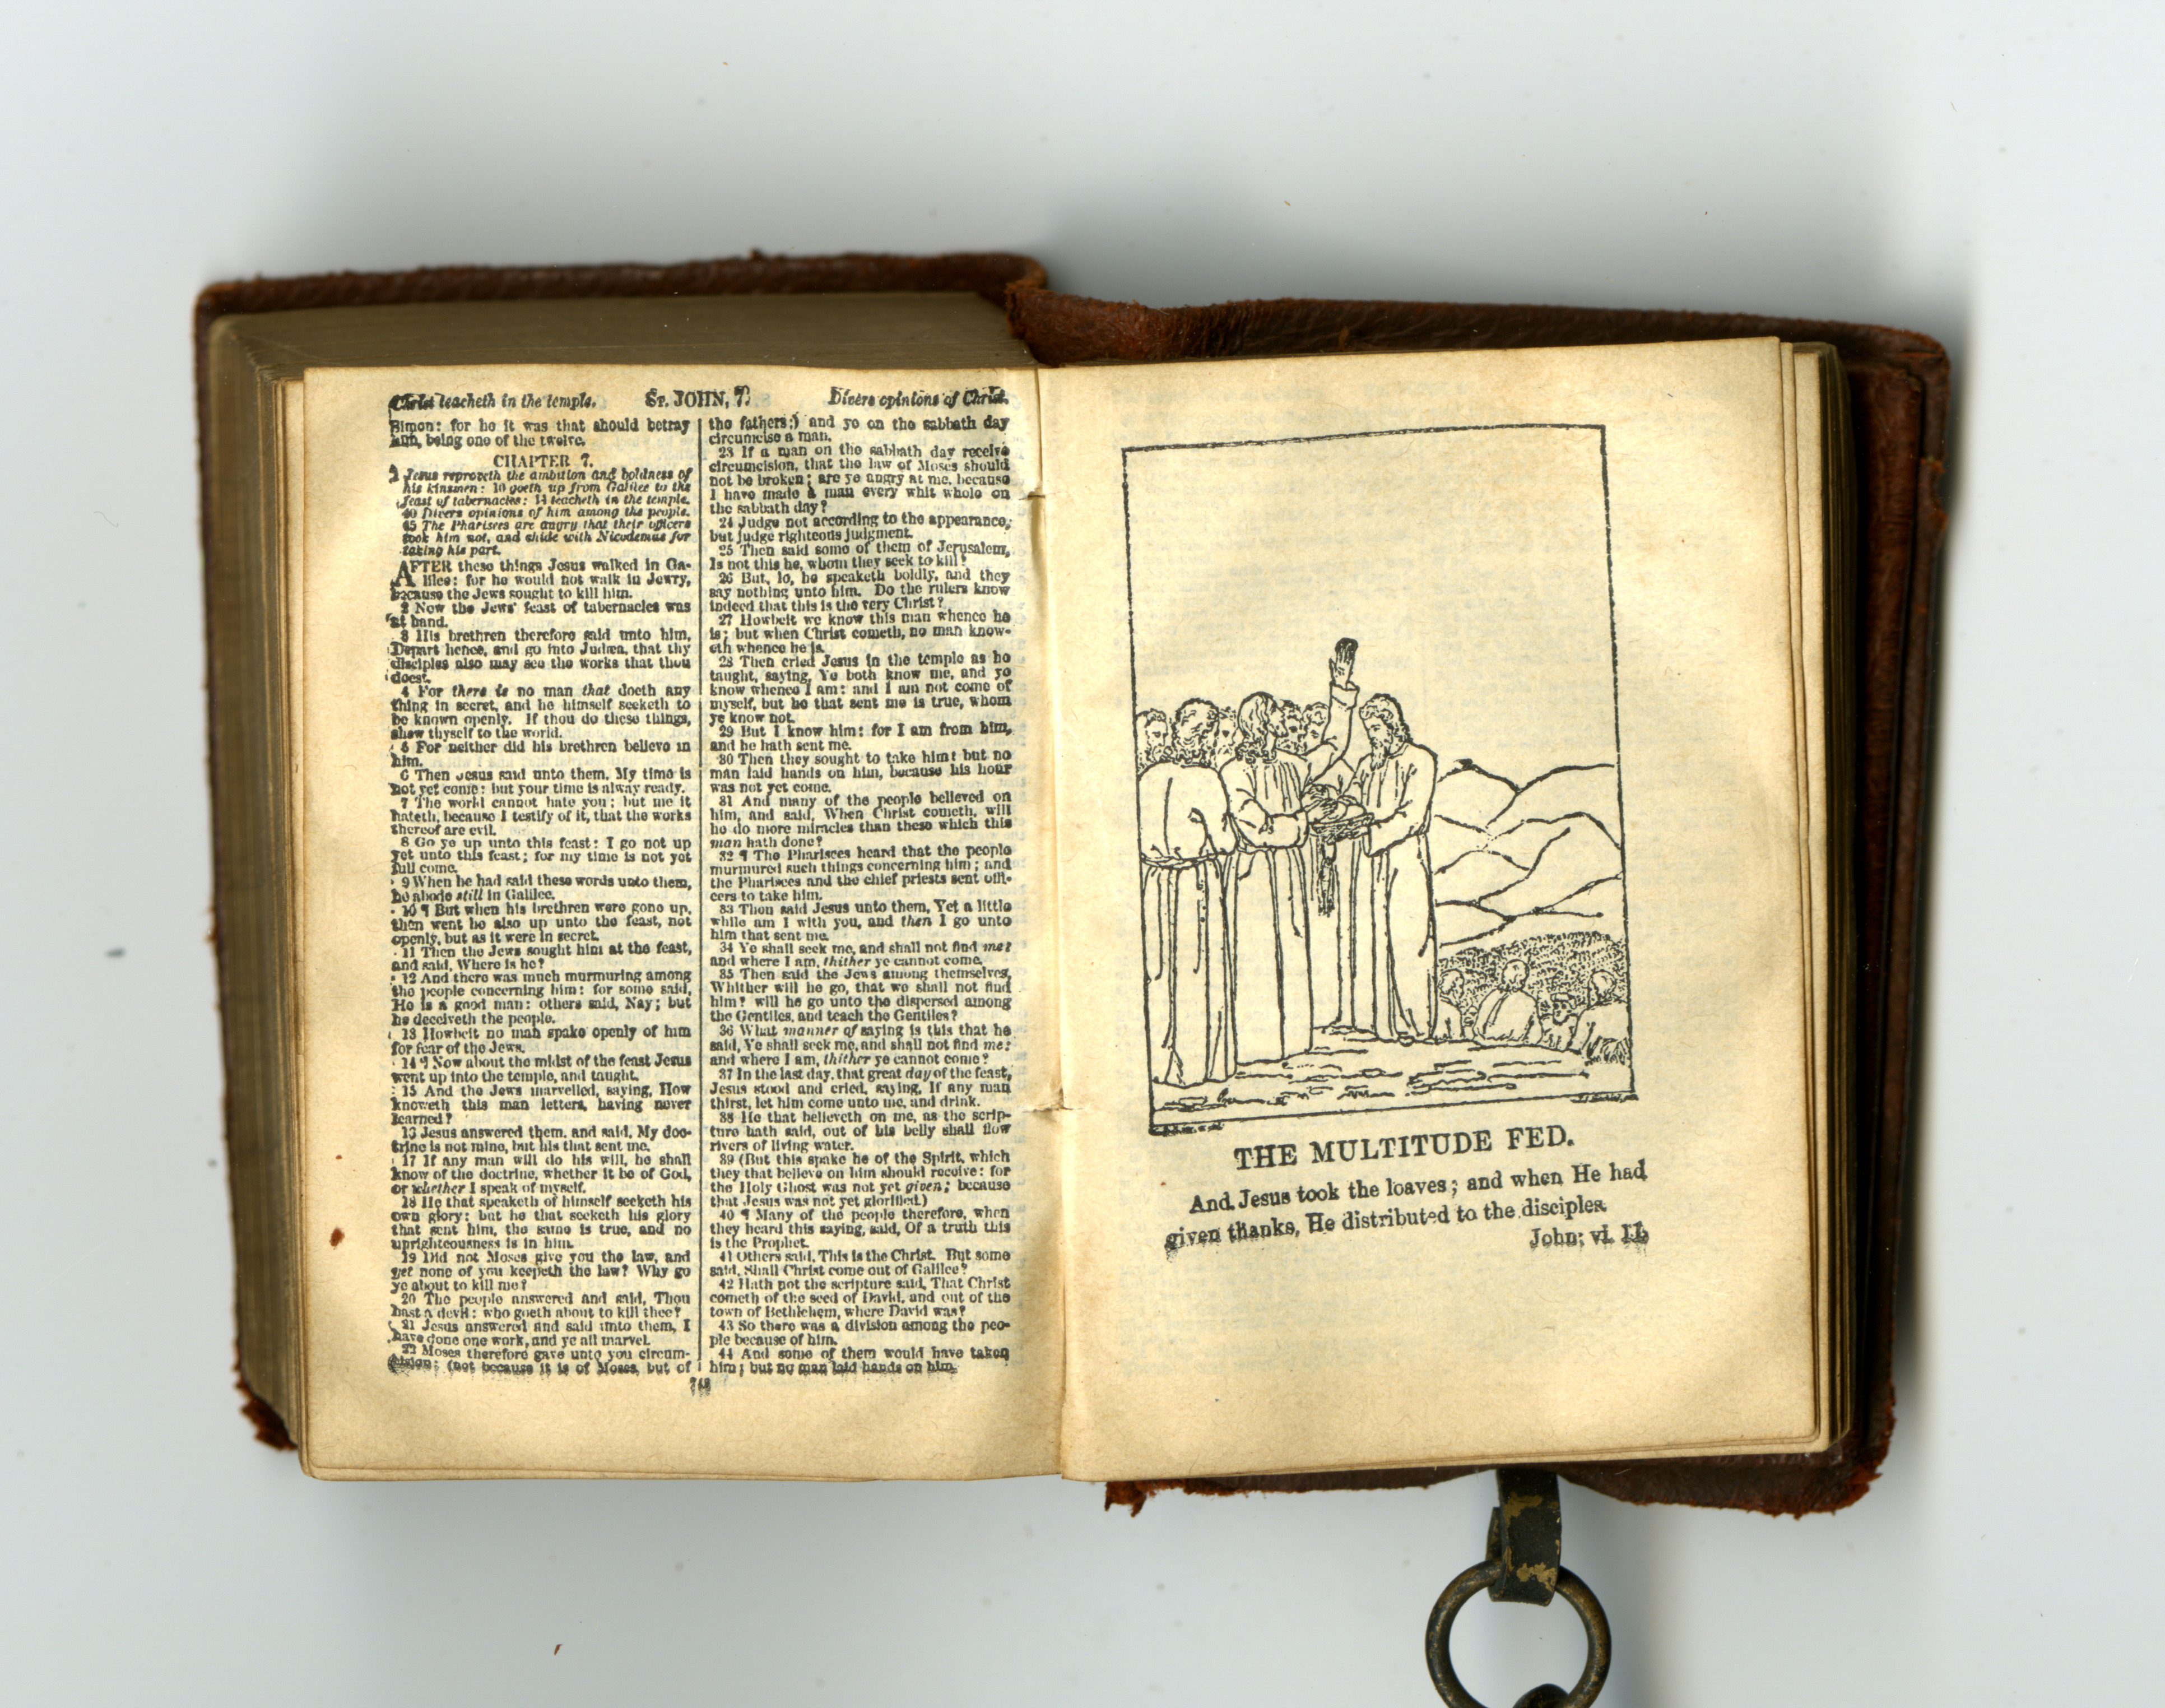 Page from John, featuring illustration of Jesus and disciples, from miniature Bible, published in Glasgow by David Bryce in 1901, attached to miniature lectern by a chain